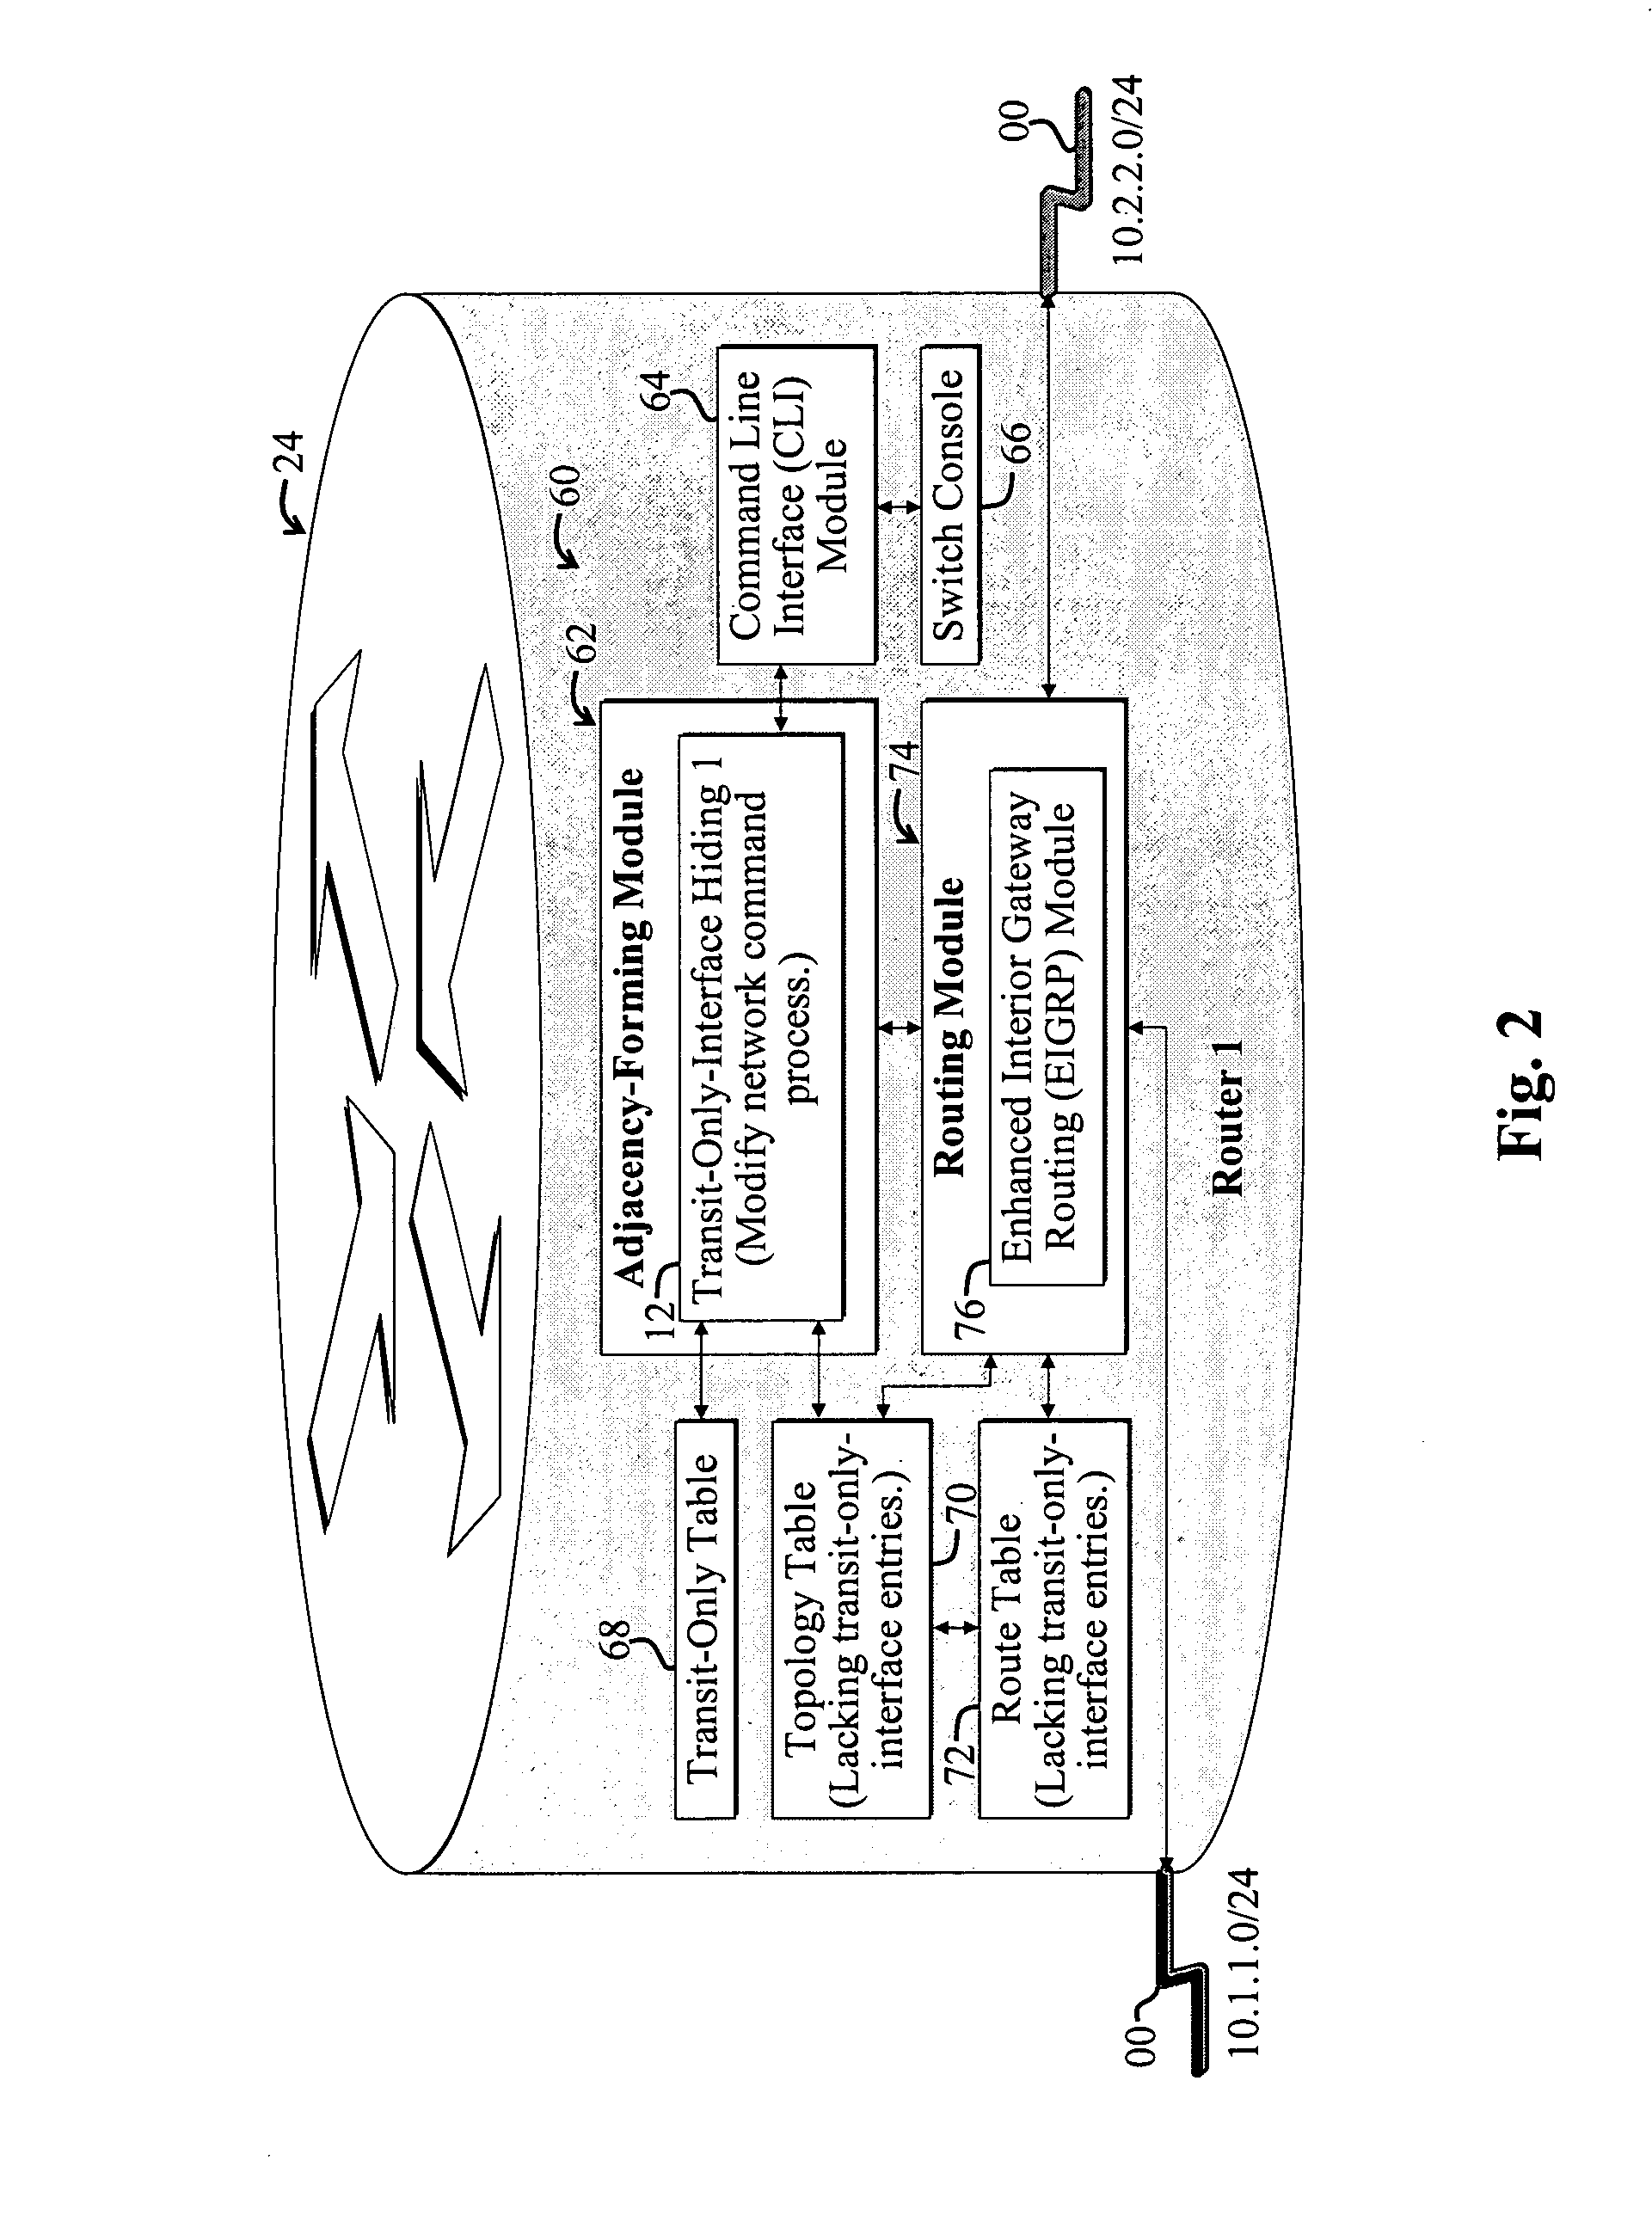 System and method for improving network performance and security by controlling topology information